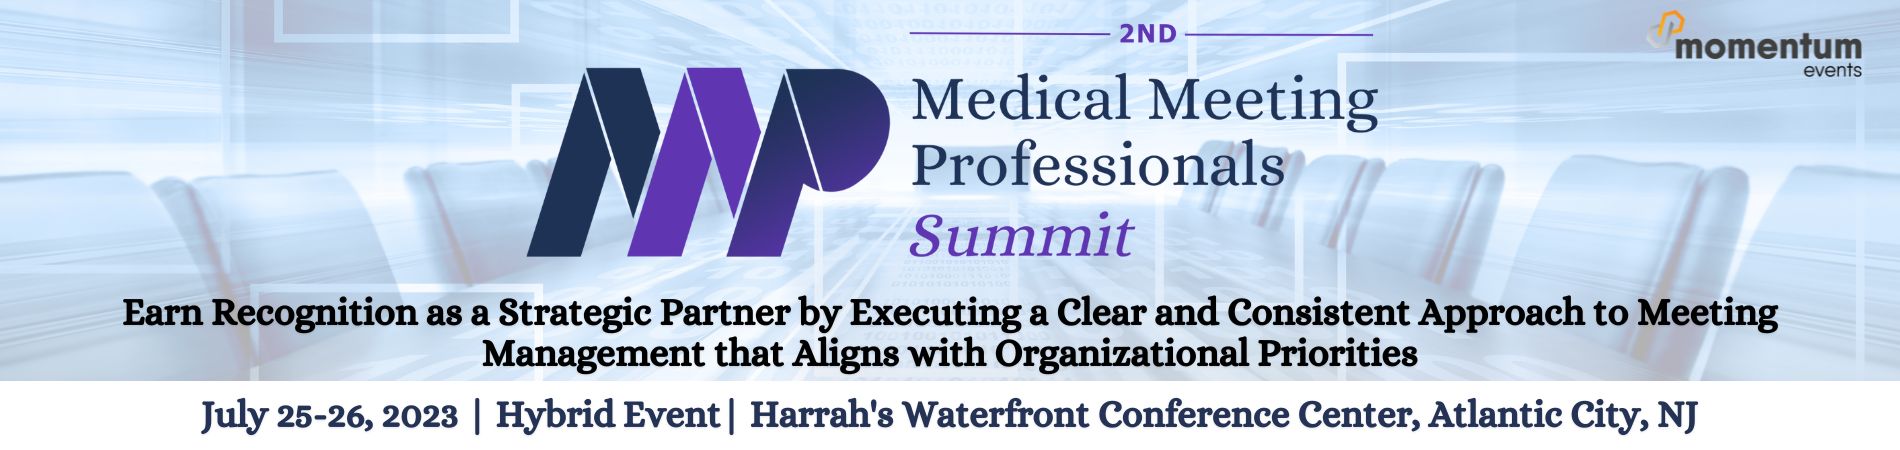 2nd Medical Meeting Professionals Summit, Atlantic City, New Jersey, United States